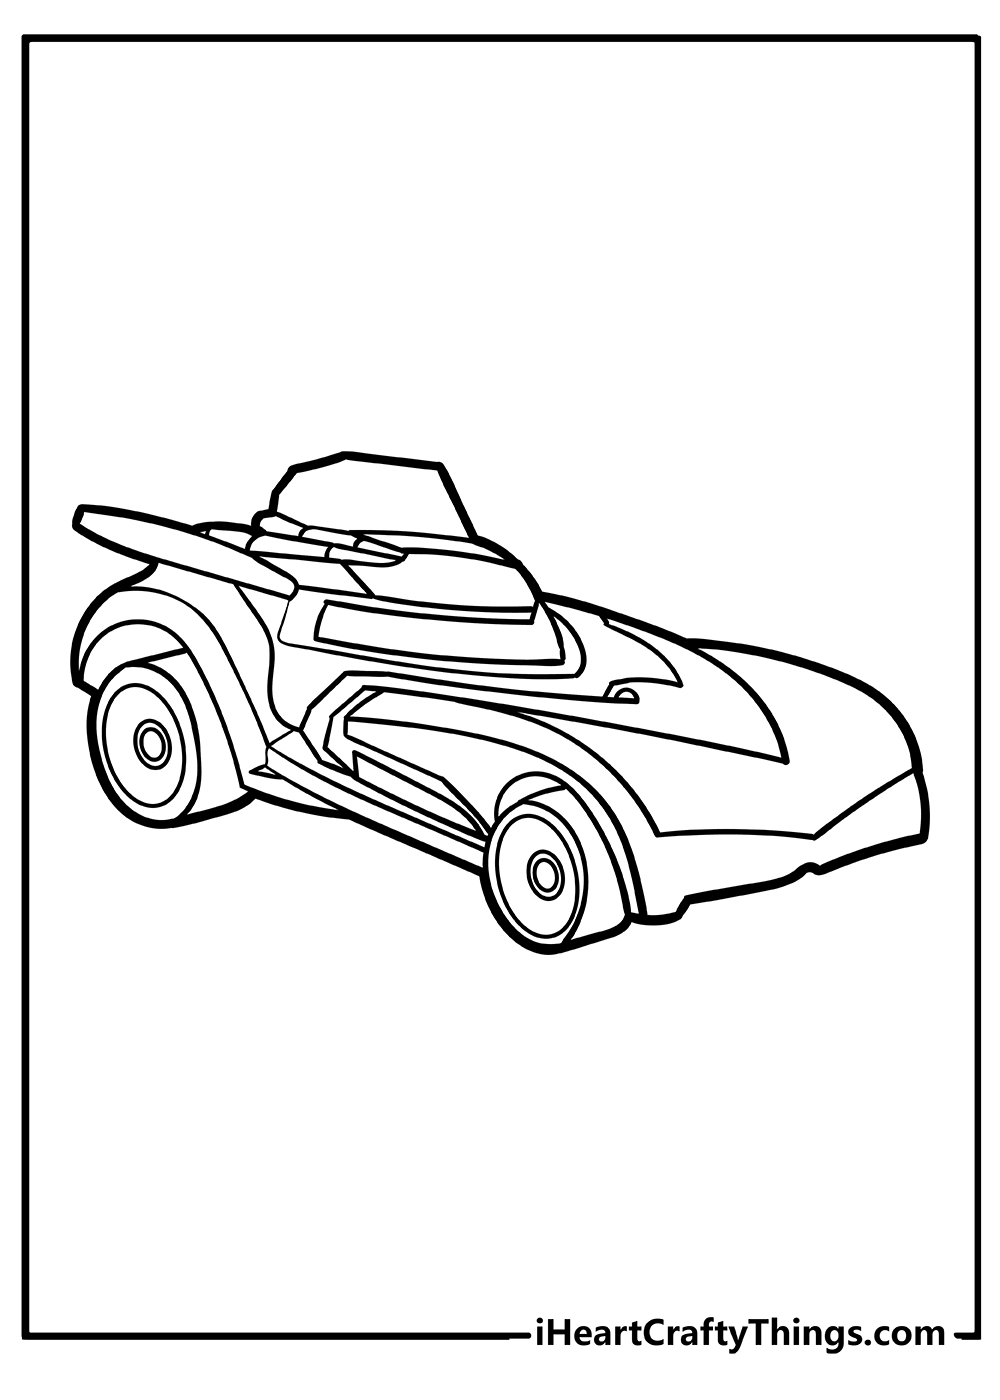 Hot Wheels Coloring Book for kids free printable